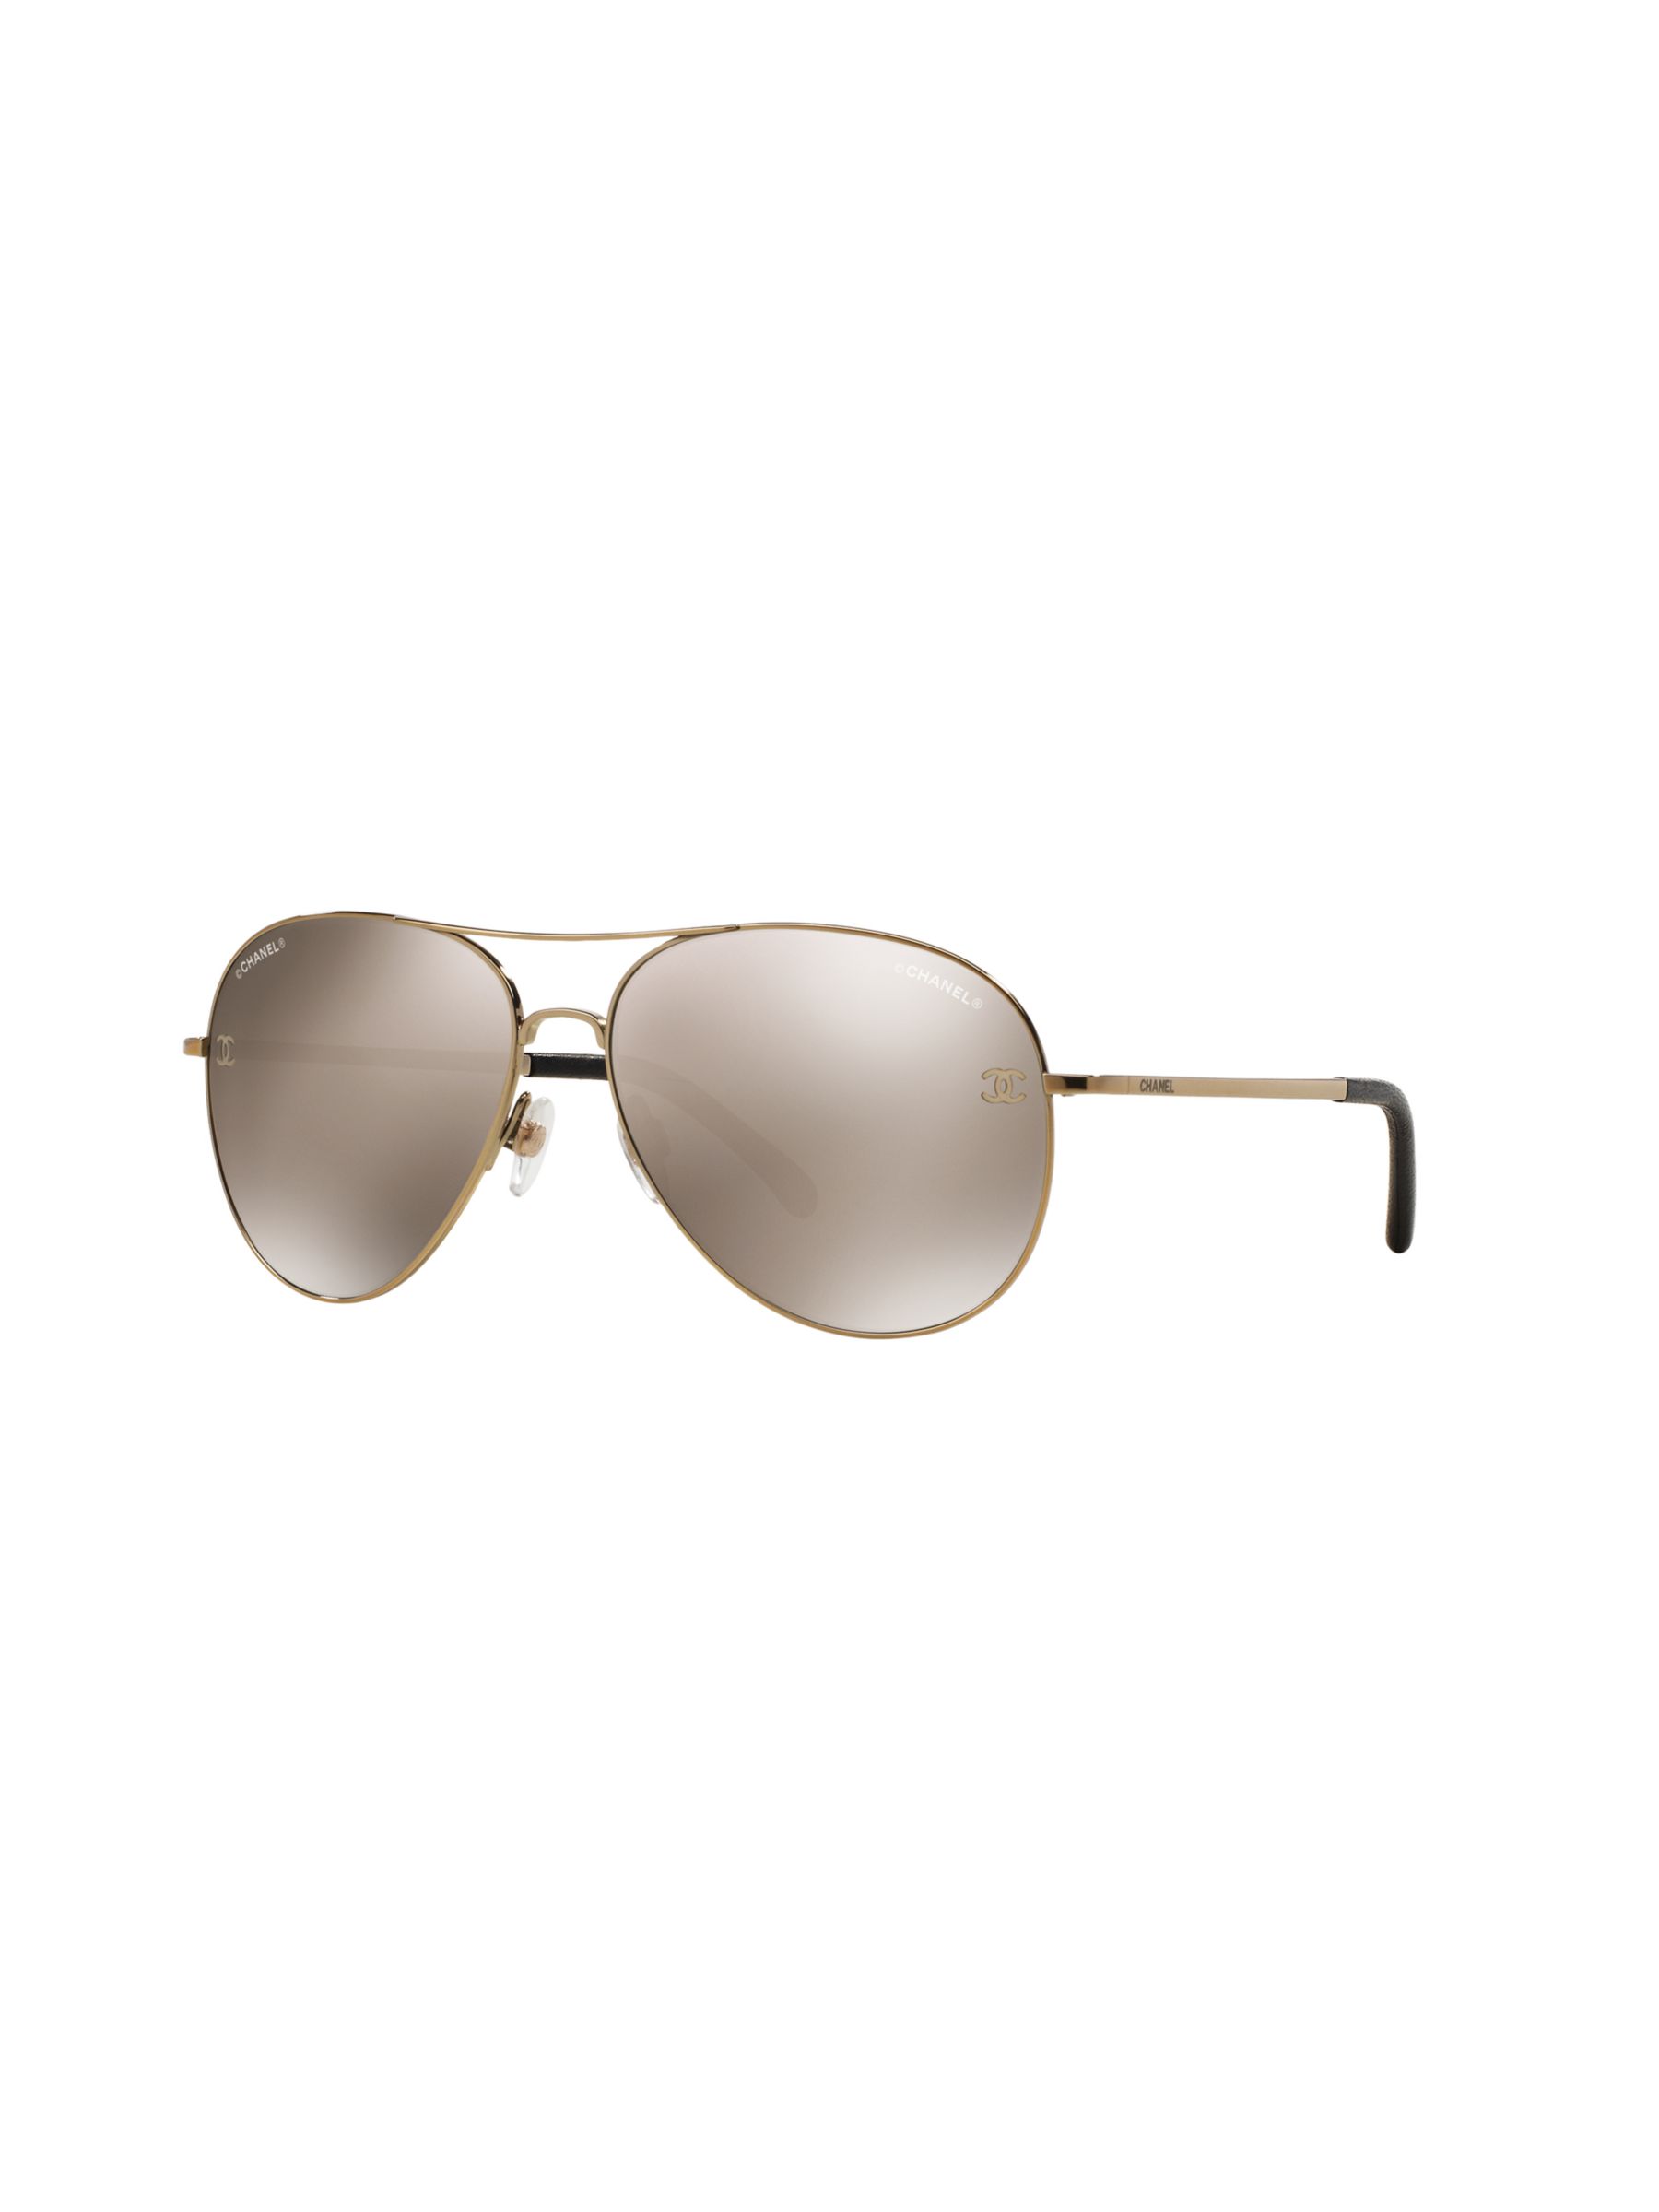 Chanel CH4189TQ Women's Mirrored Sunglasses, Pale Gold at John Lewis ...